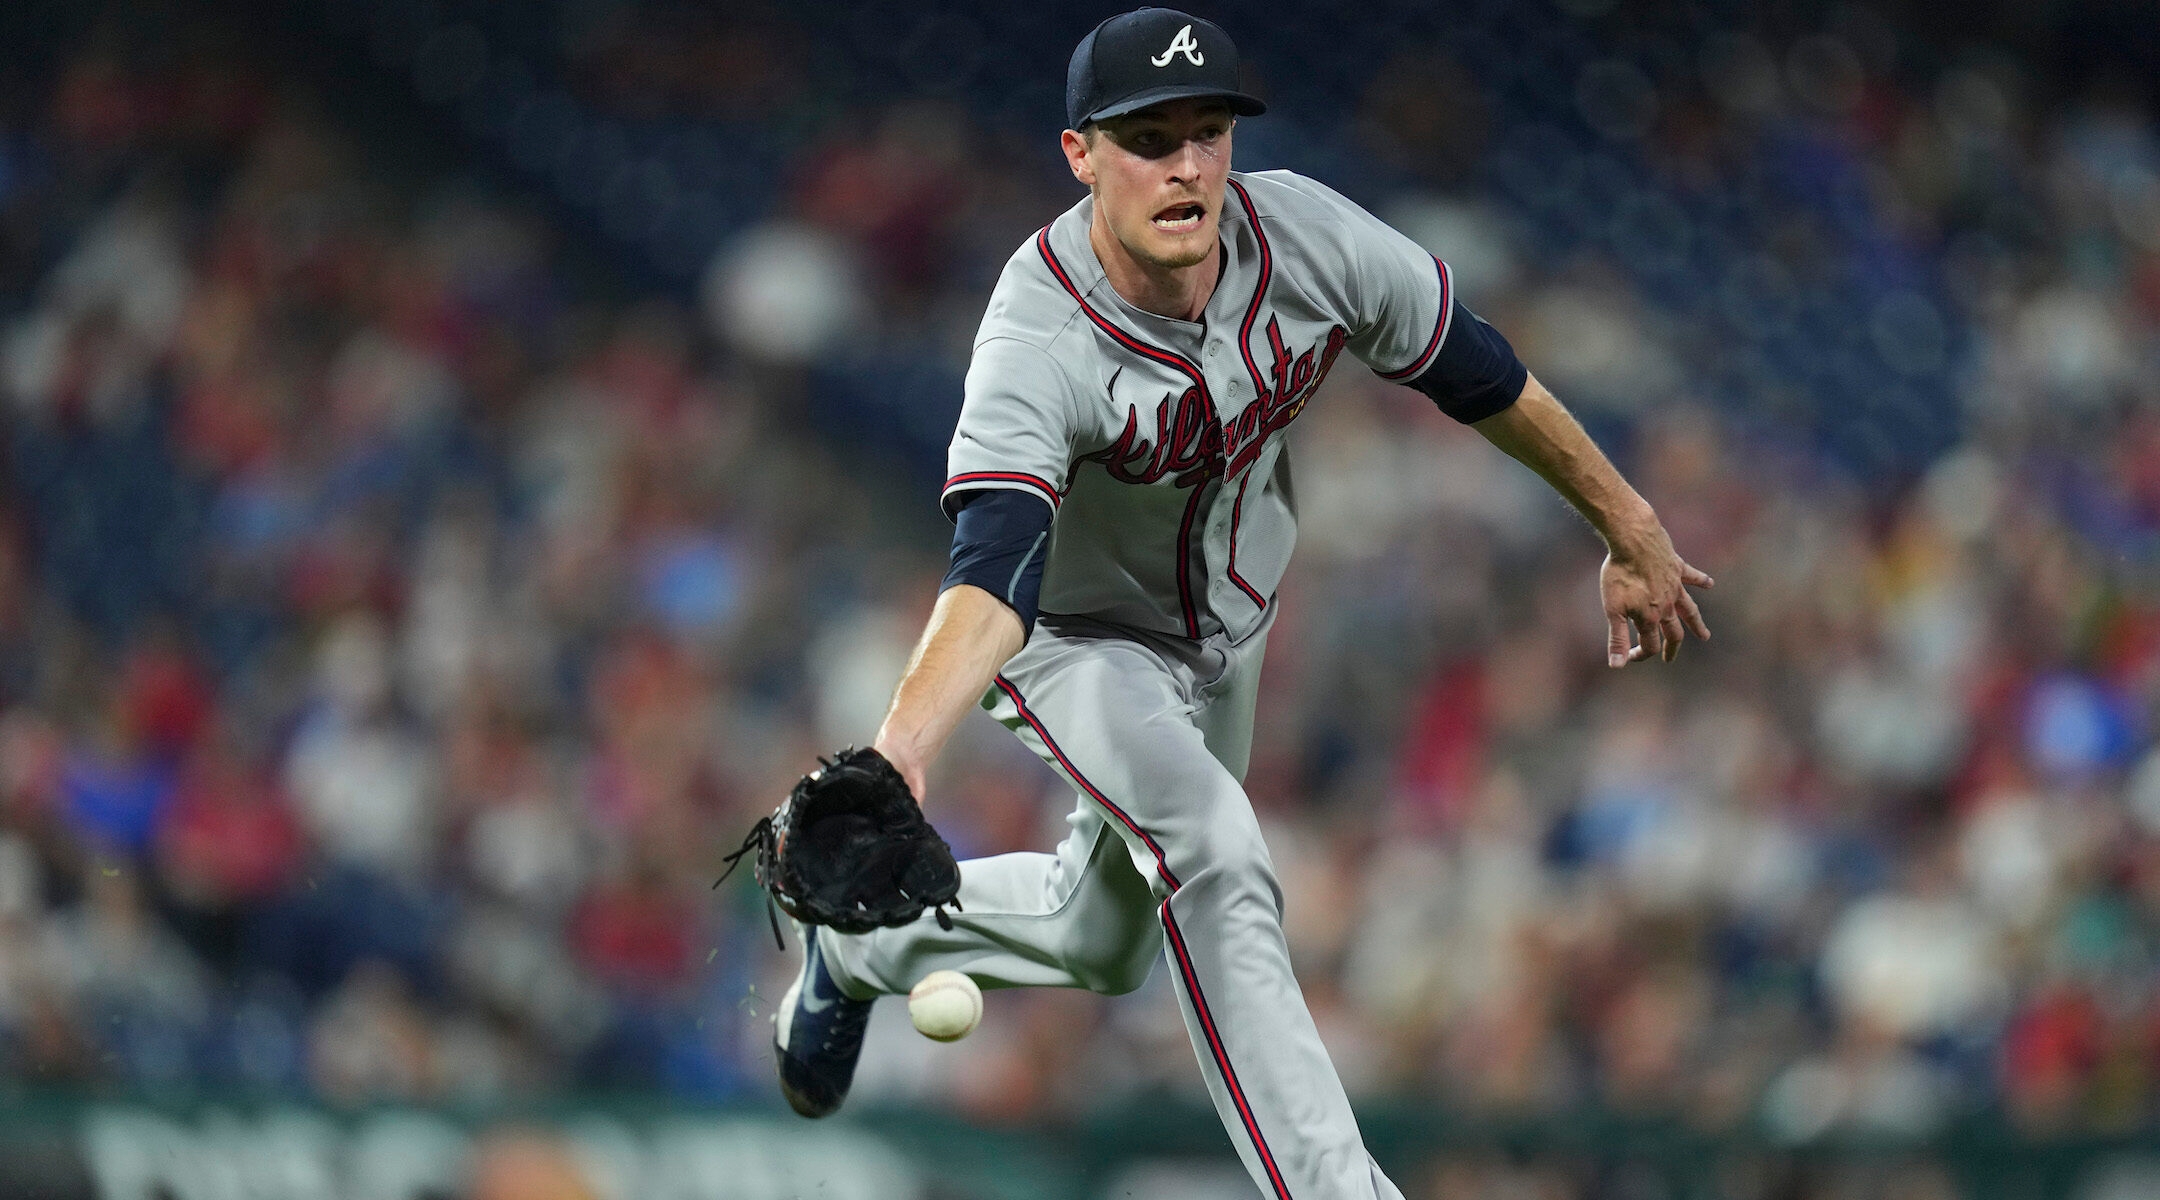 Jewish ace Max Fried wins 3rd straight Gold Glove award for best